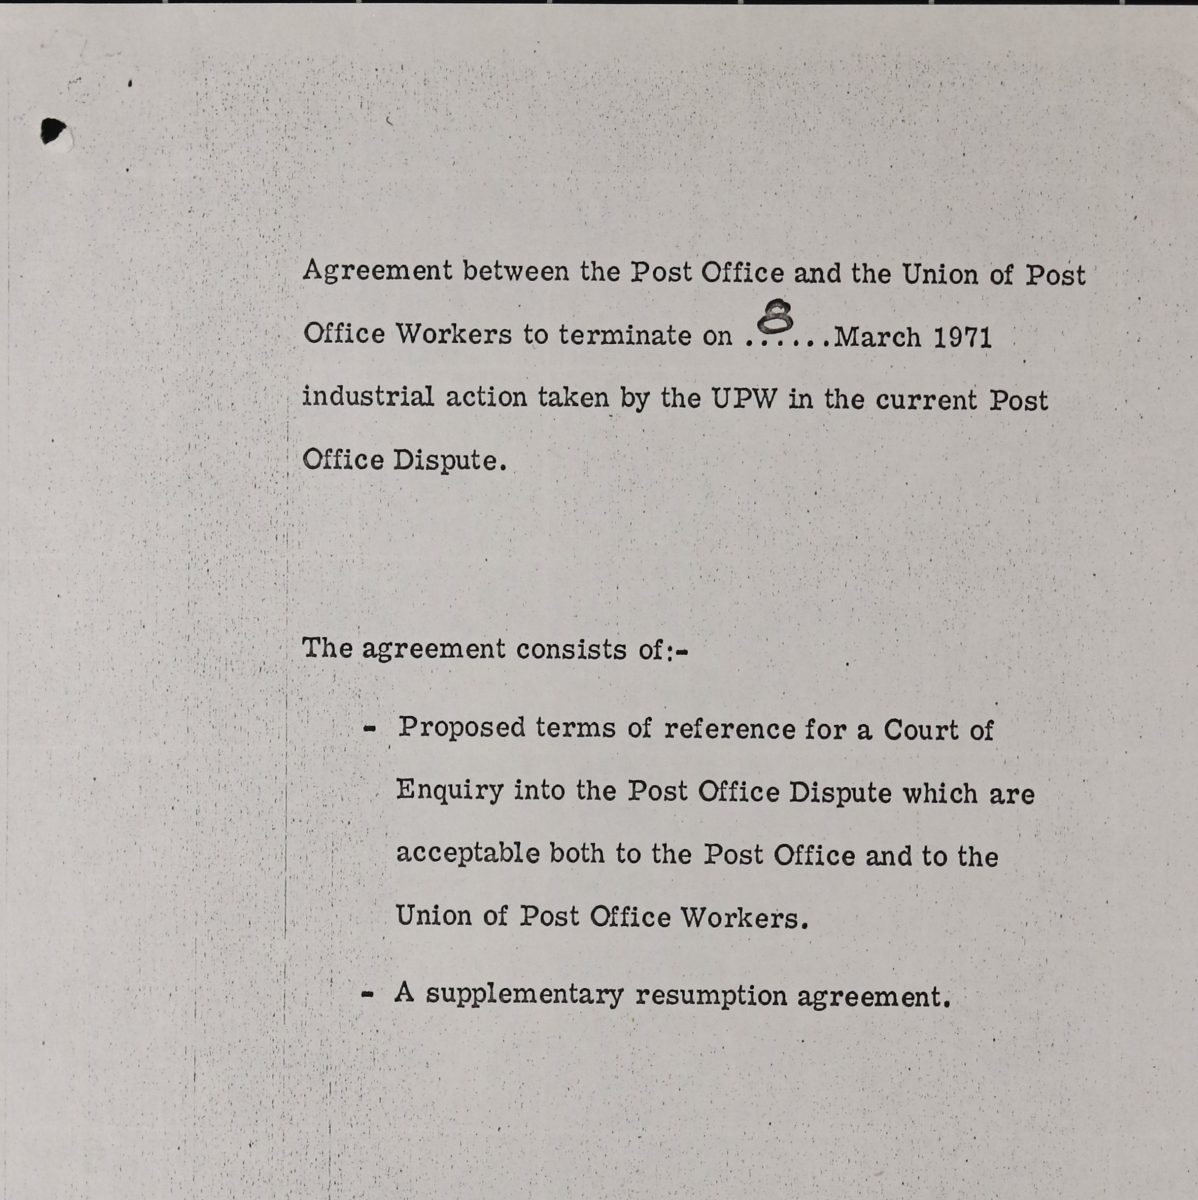 A typescript document reading ‘Agreement between the Post Office and the Union of Post Office Workers to terminate on 8 March 1971 industrial action taken by the UPW in the current Post Office dispute. The agreement consists of: Proposed terms of reference for a Court of Enquiry into the Post Office Dispute which are acceptable to both the Post Office and to the Union of Post Office Workers; a supplementary resumption agreement.